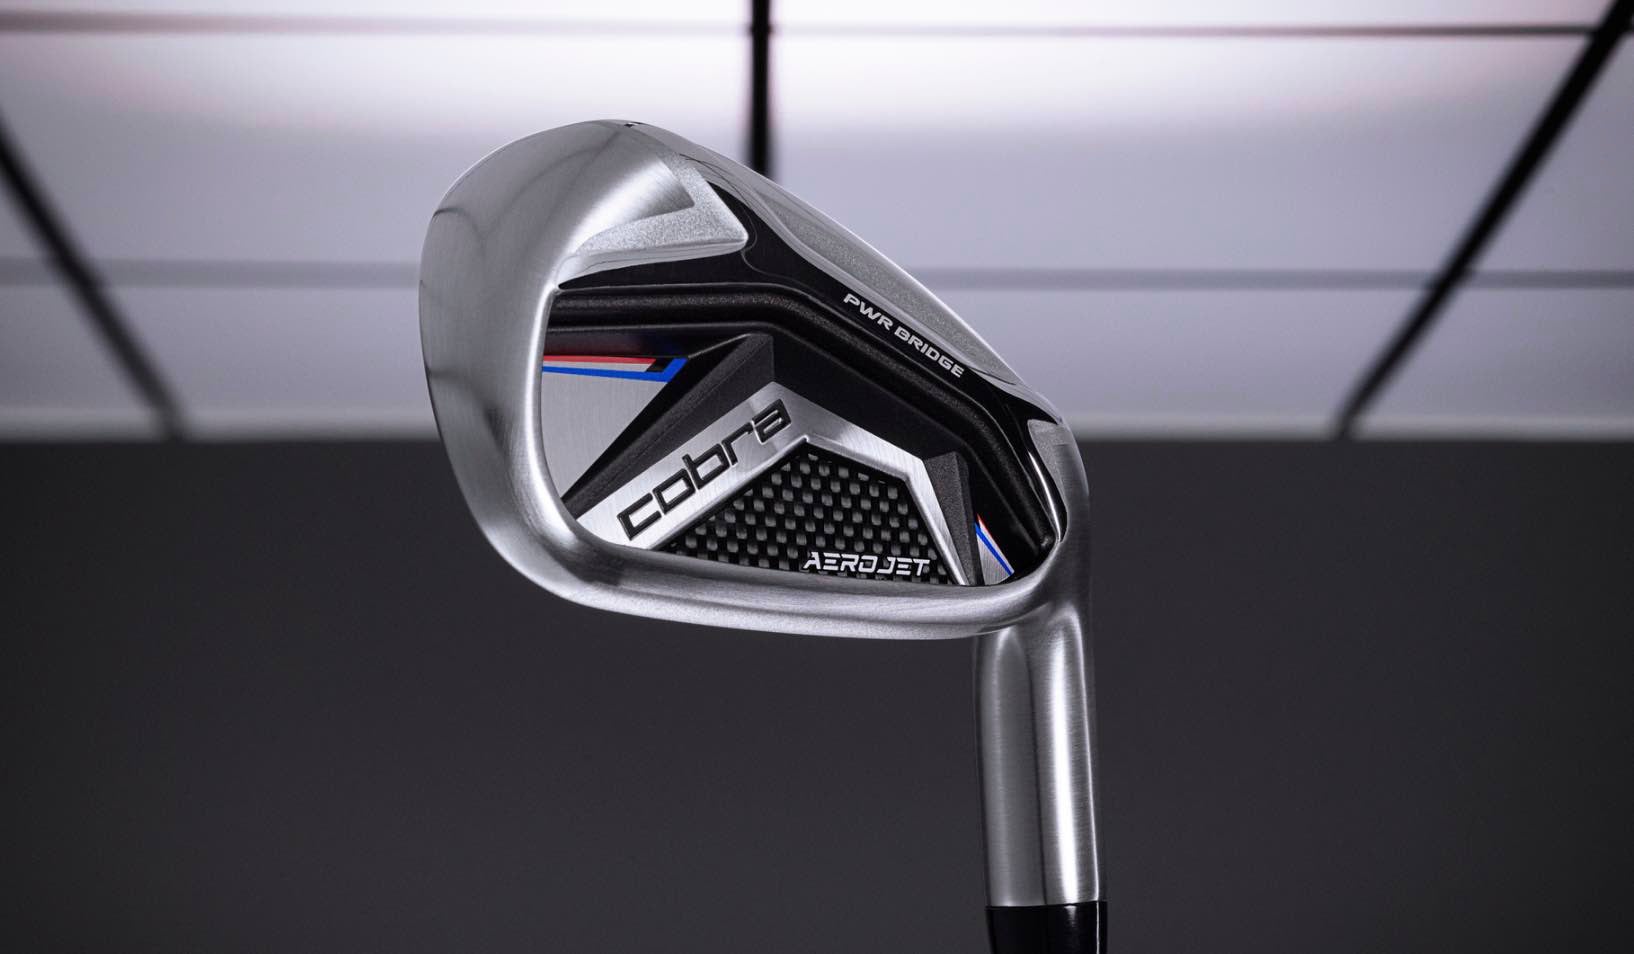 Cobra Aerojet hybrids and irons help you hit it closer First Look